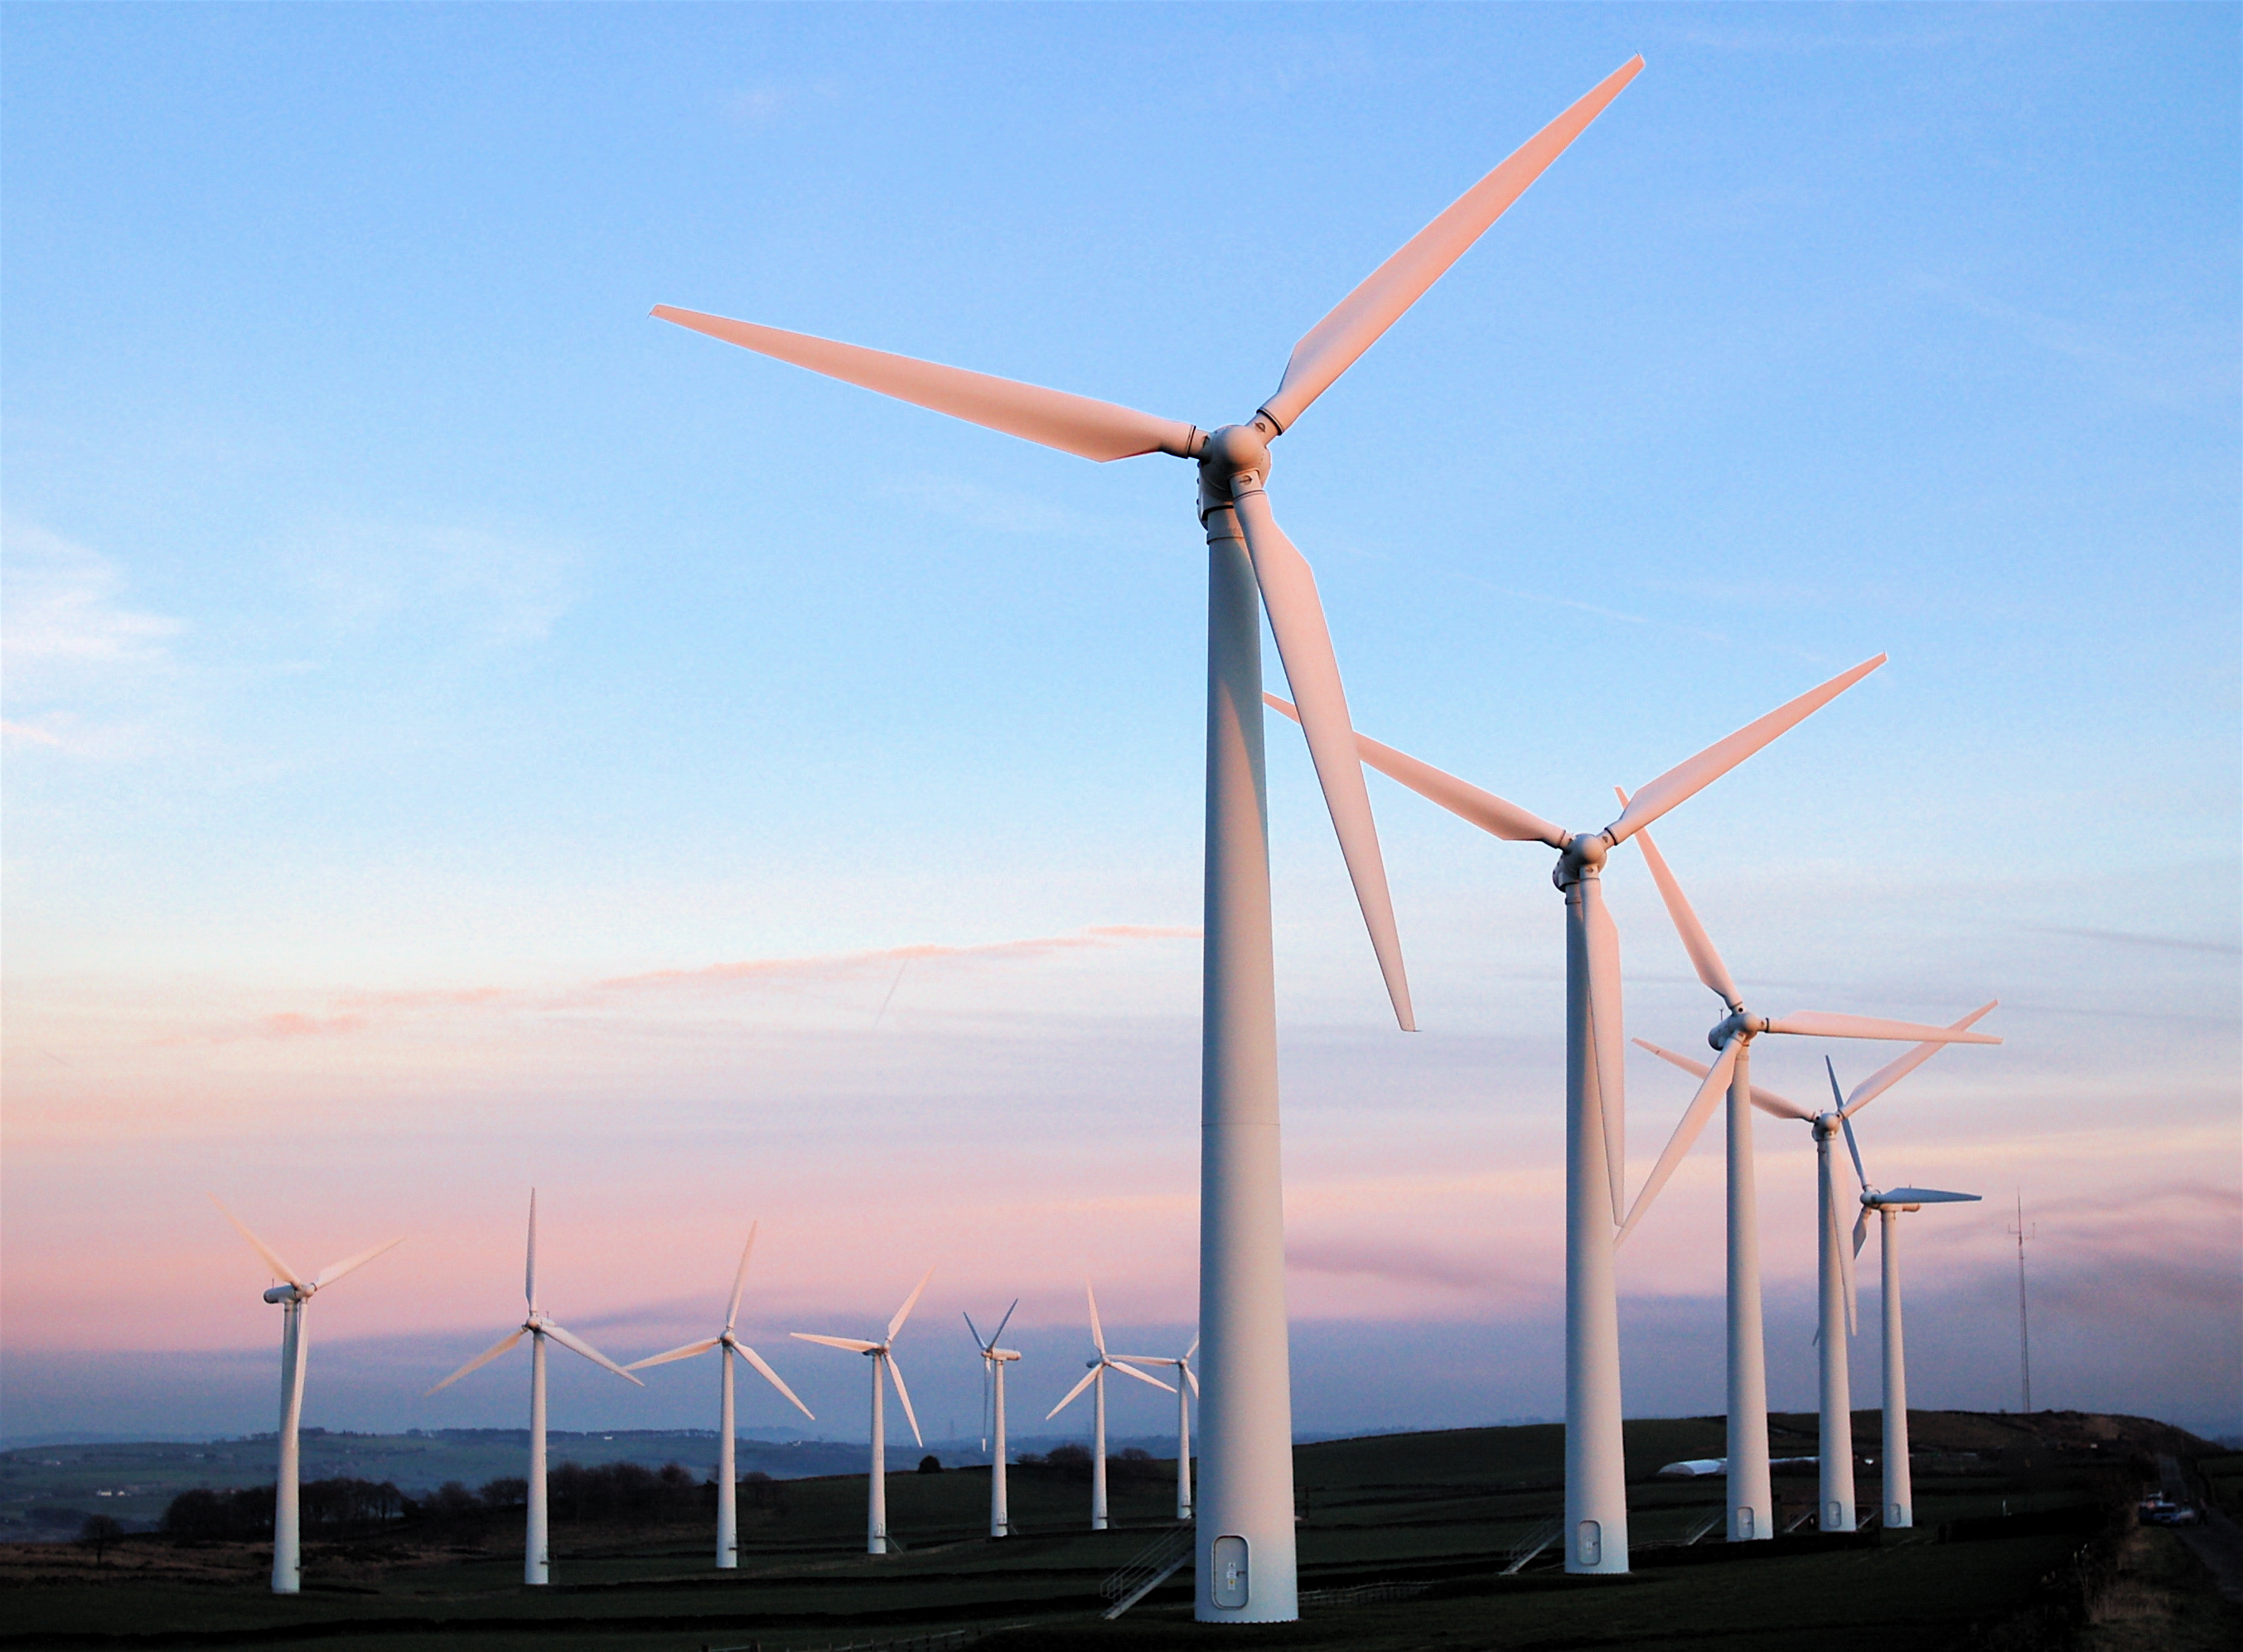 Main Advantages and Disadvantages of Wind Energy